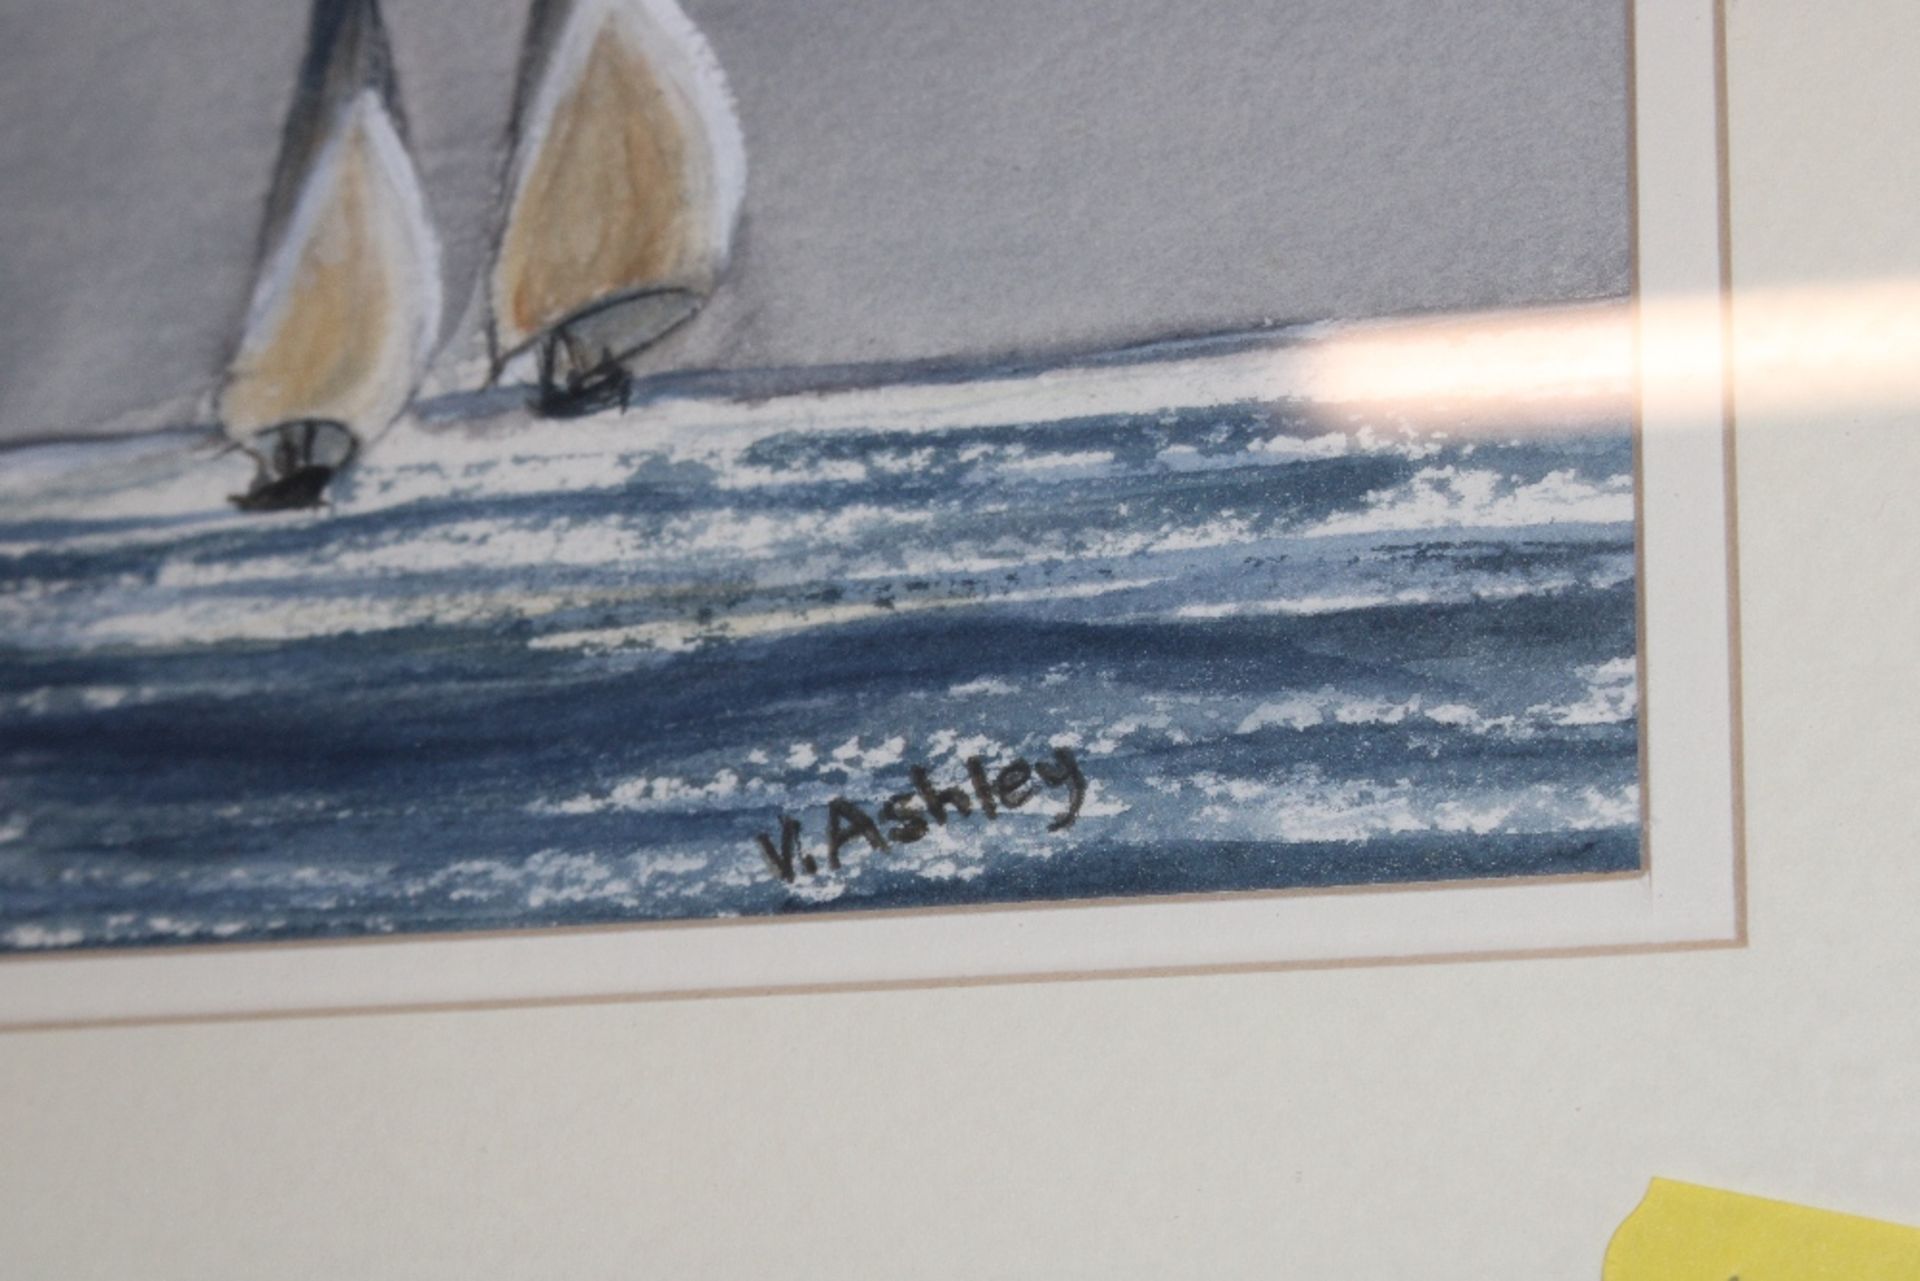 K. Ashley, study of sailing boats in the moonlight - Image 3 of 3